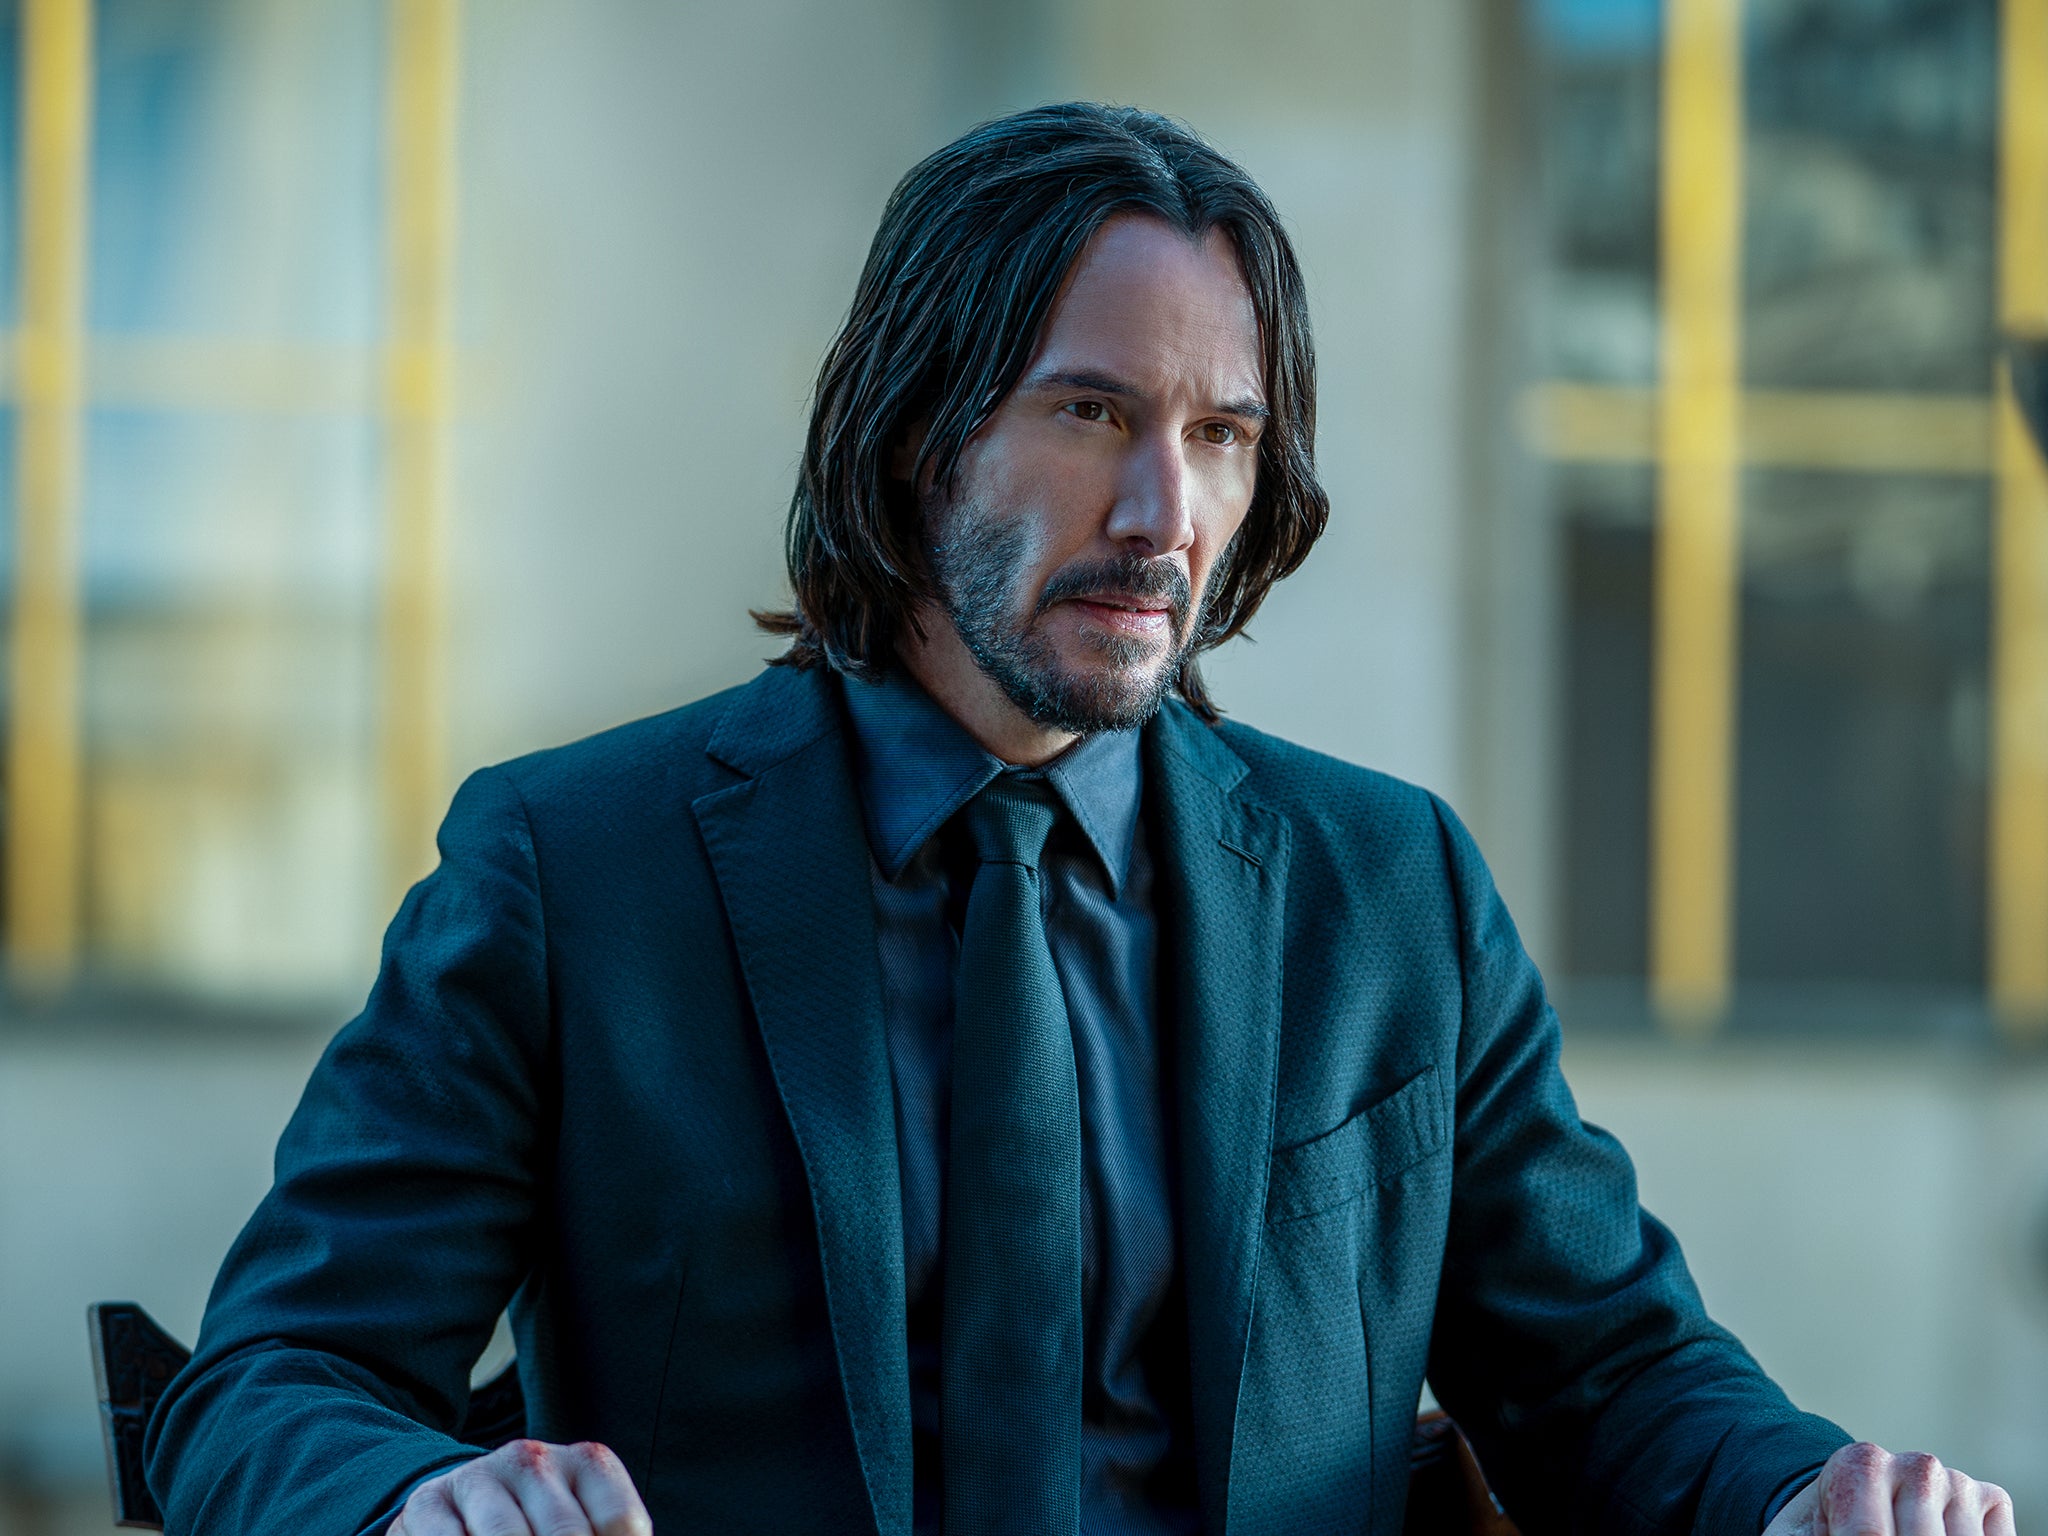 Does John Wick die at the end of John Wick: Chapter 4?